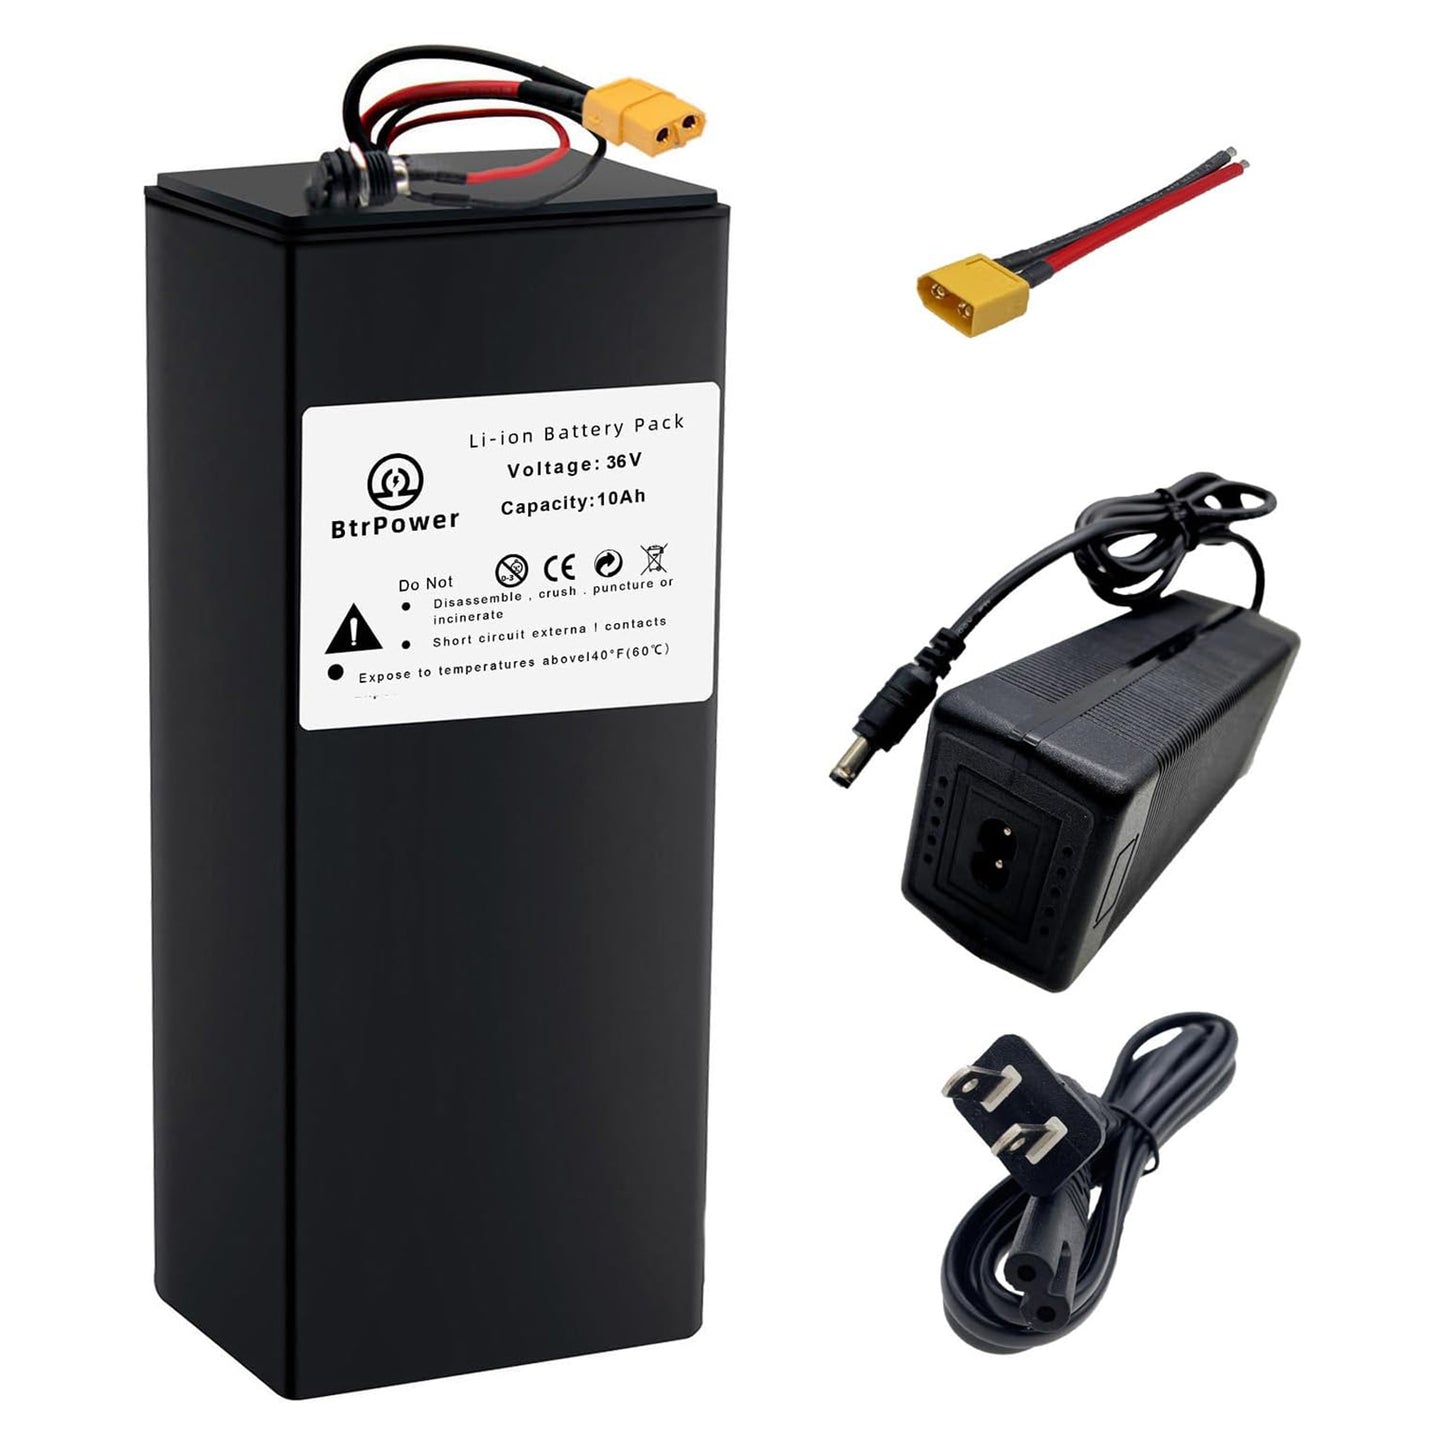 BtrPower Ebike Battery 36V 10AH, Li- ion Battery Pack with 3A Charger and BMS